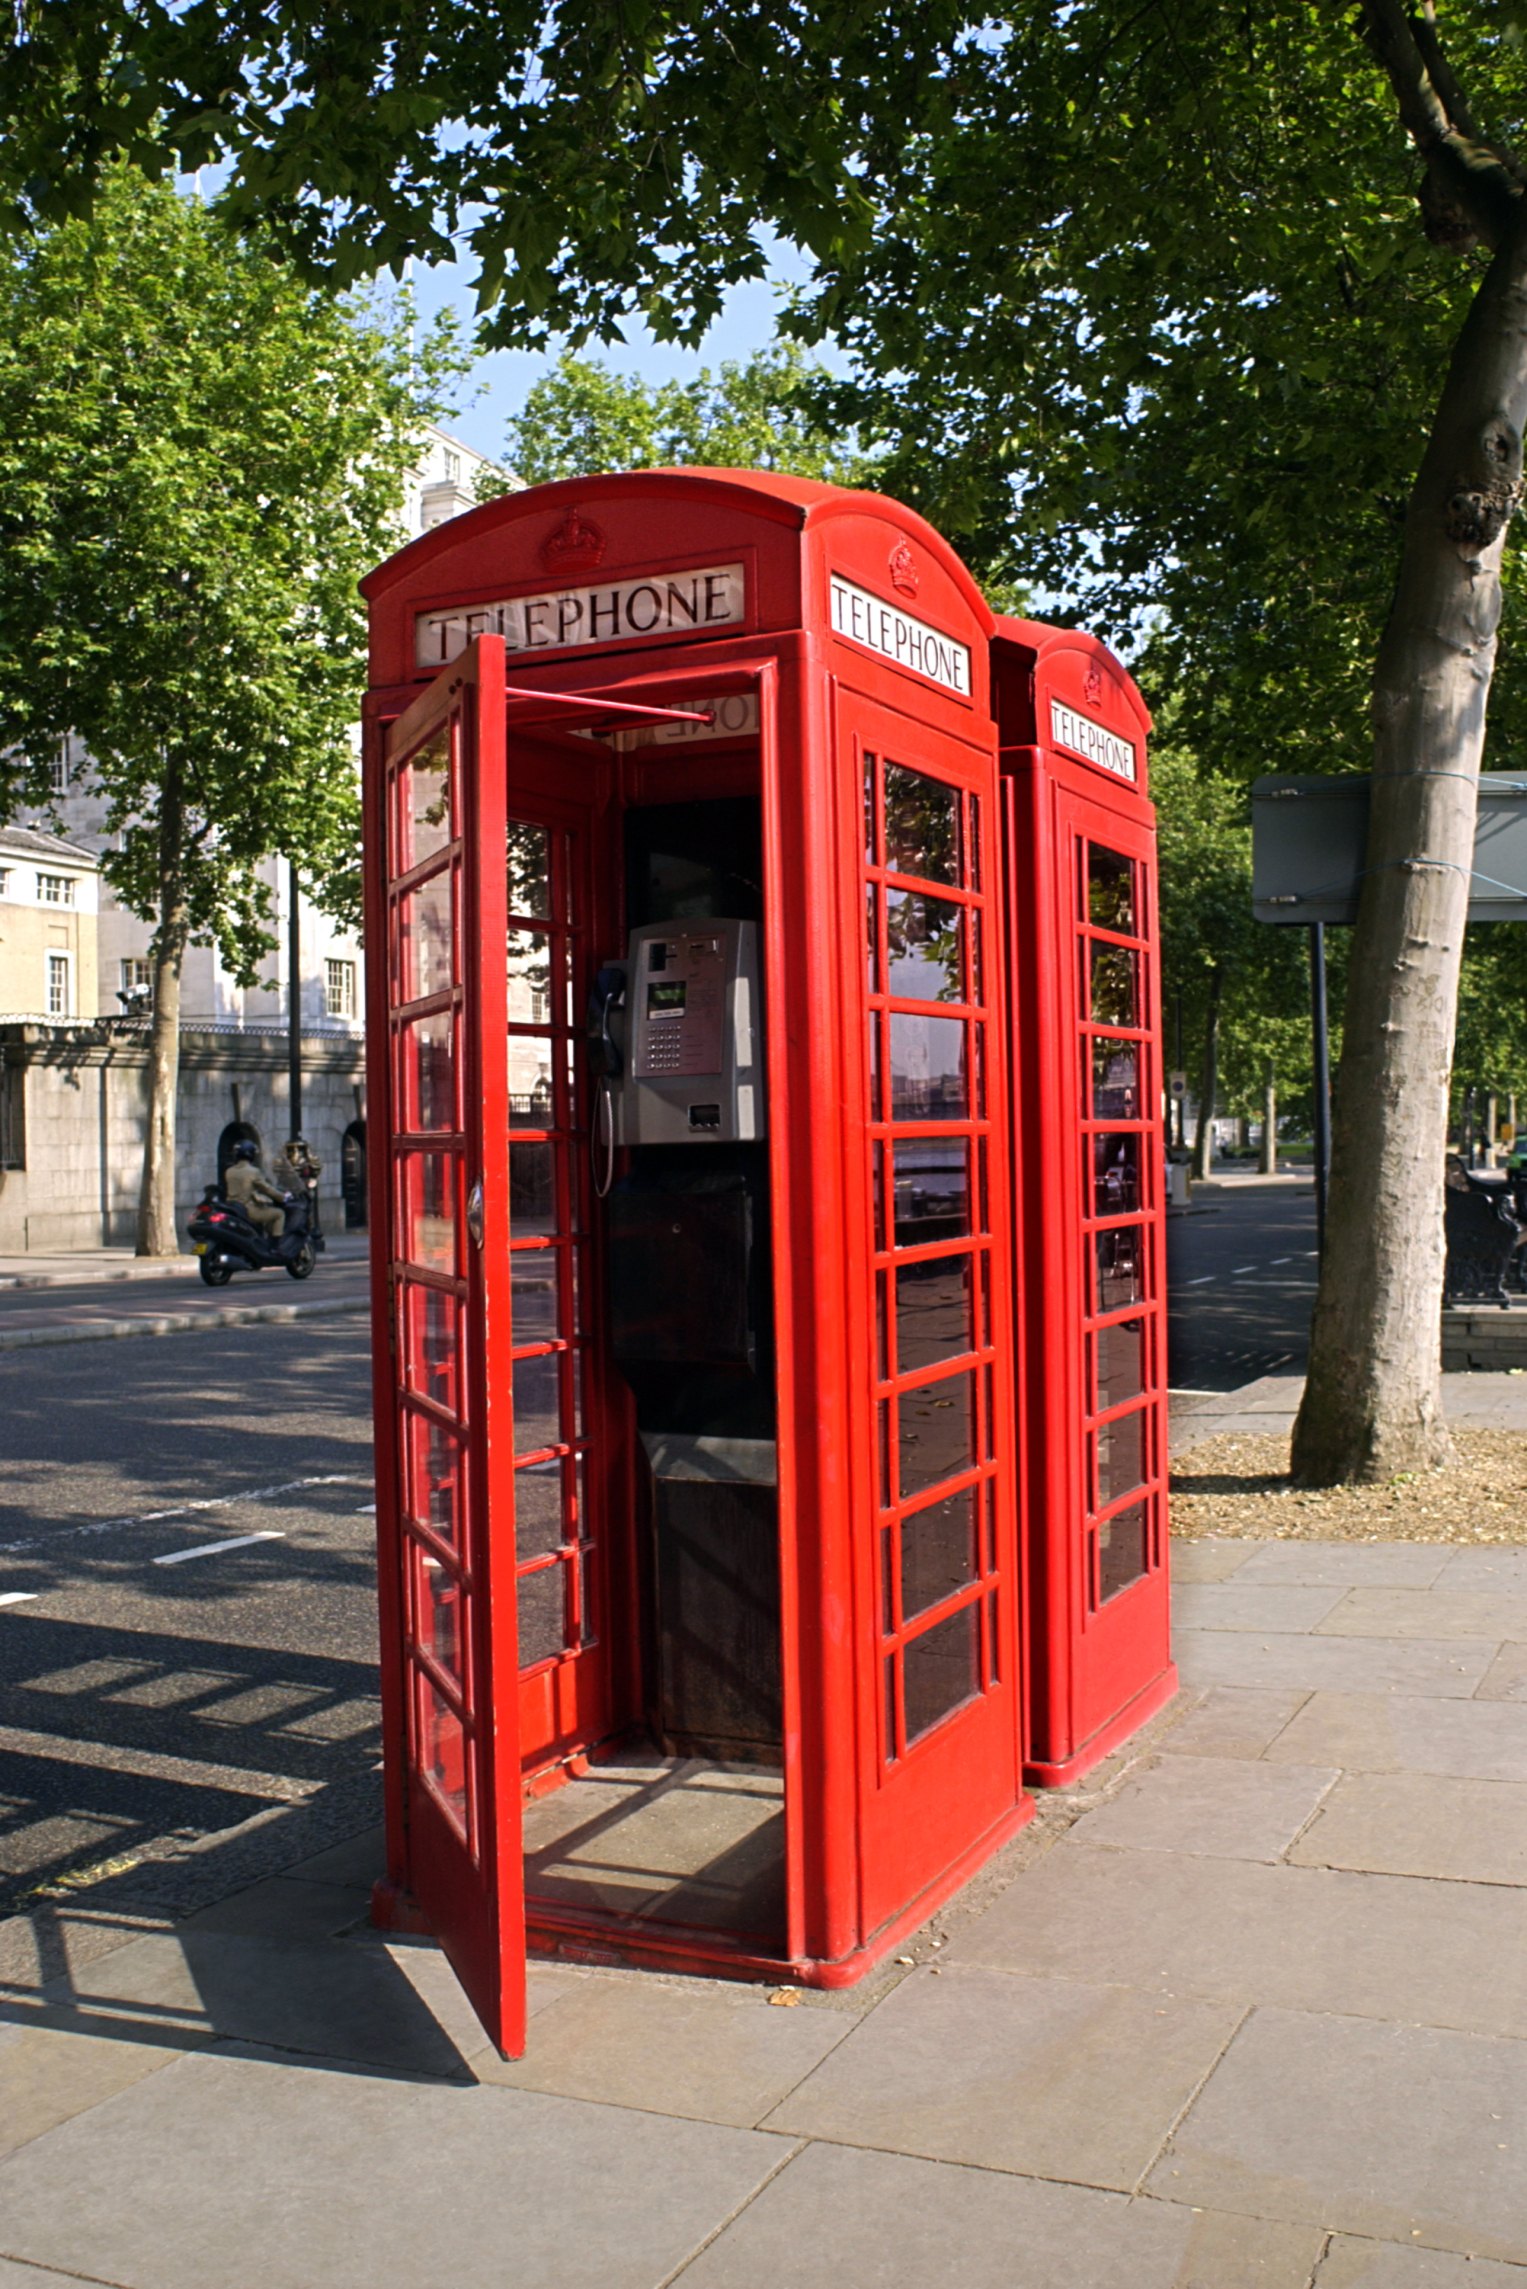 How To Make A Phone Booth From A Cardboard Box